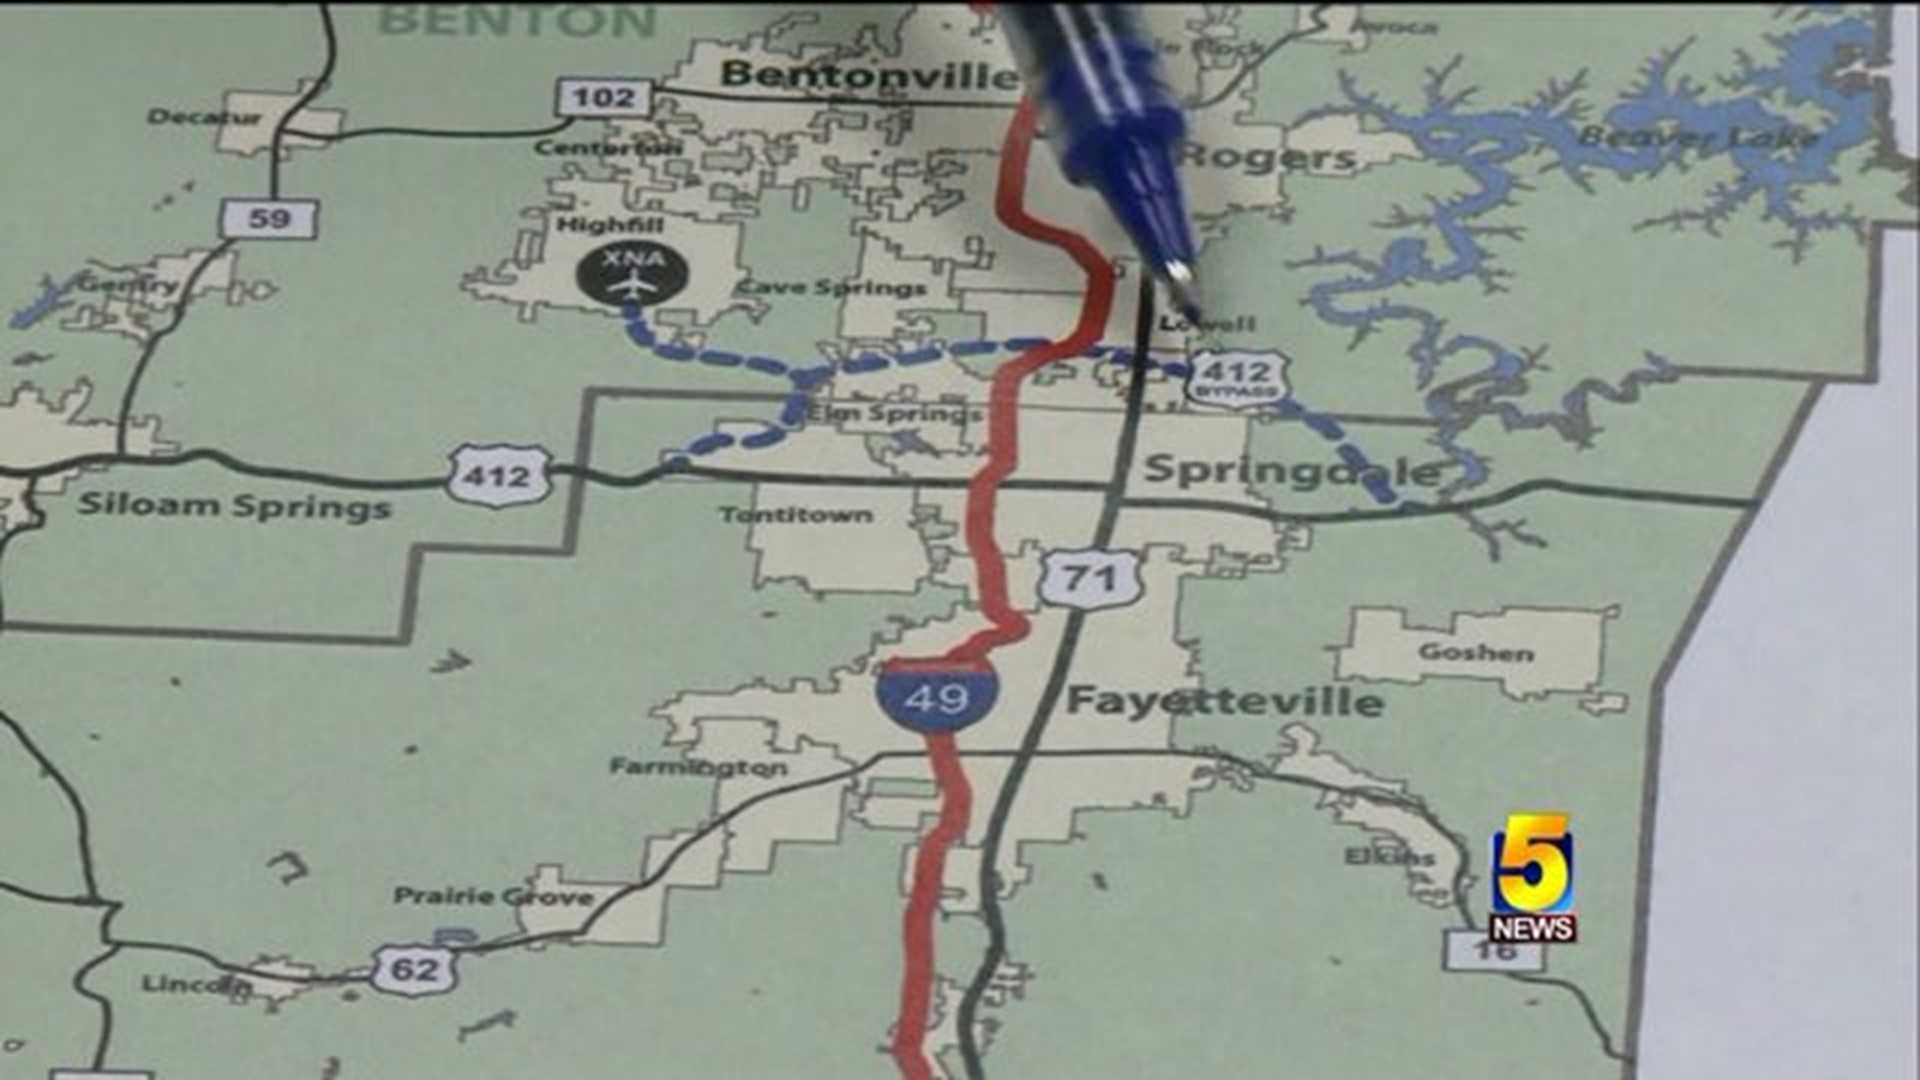 AHTD Agrees To Pay More Than $100 Million For Springdale Bypass